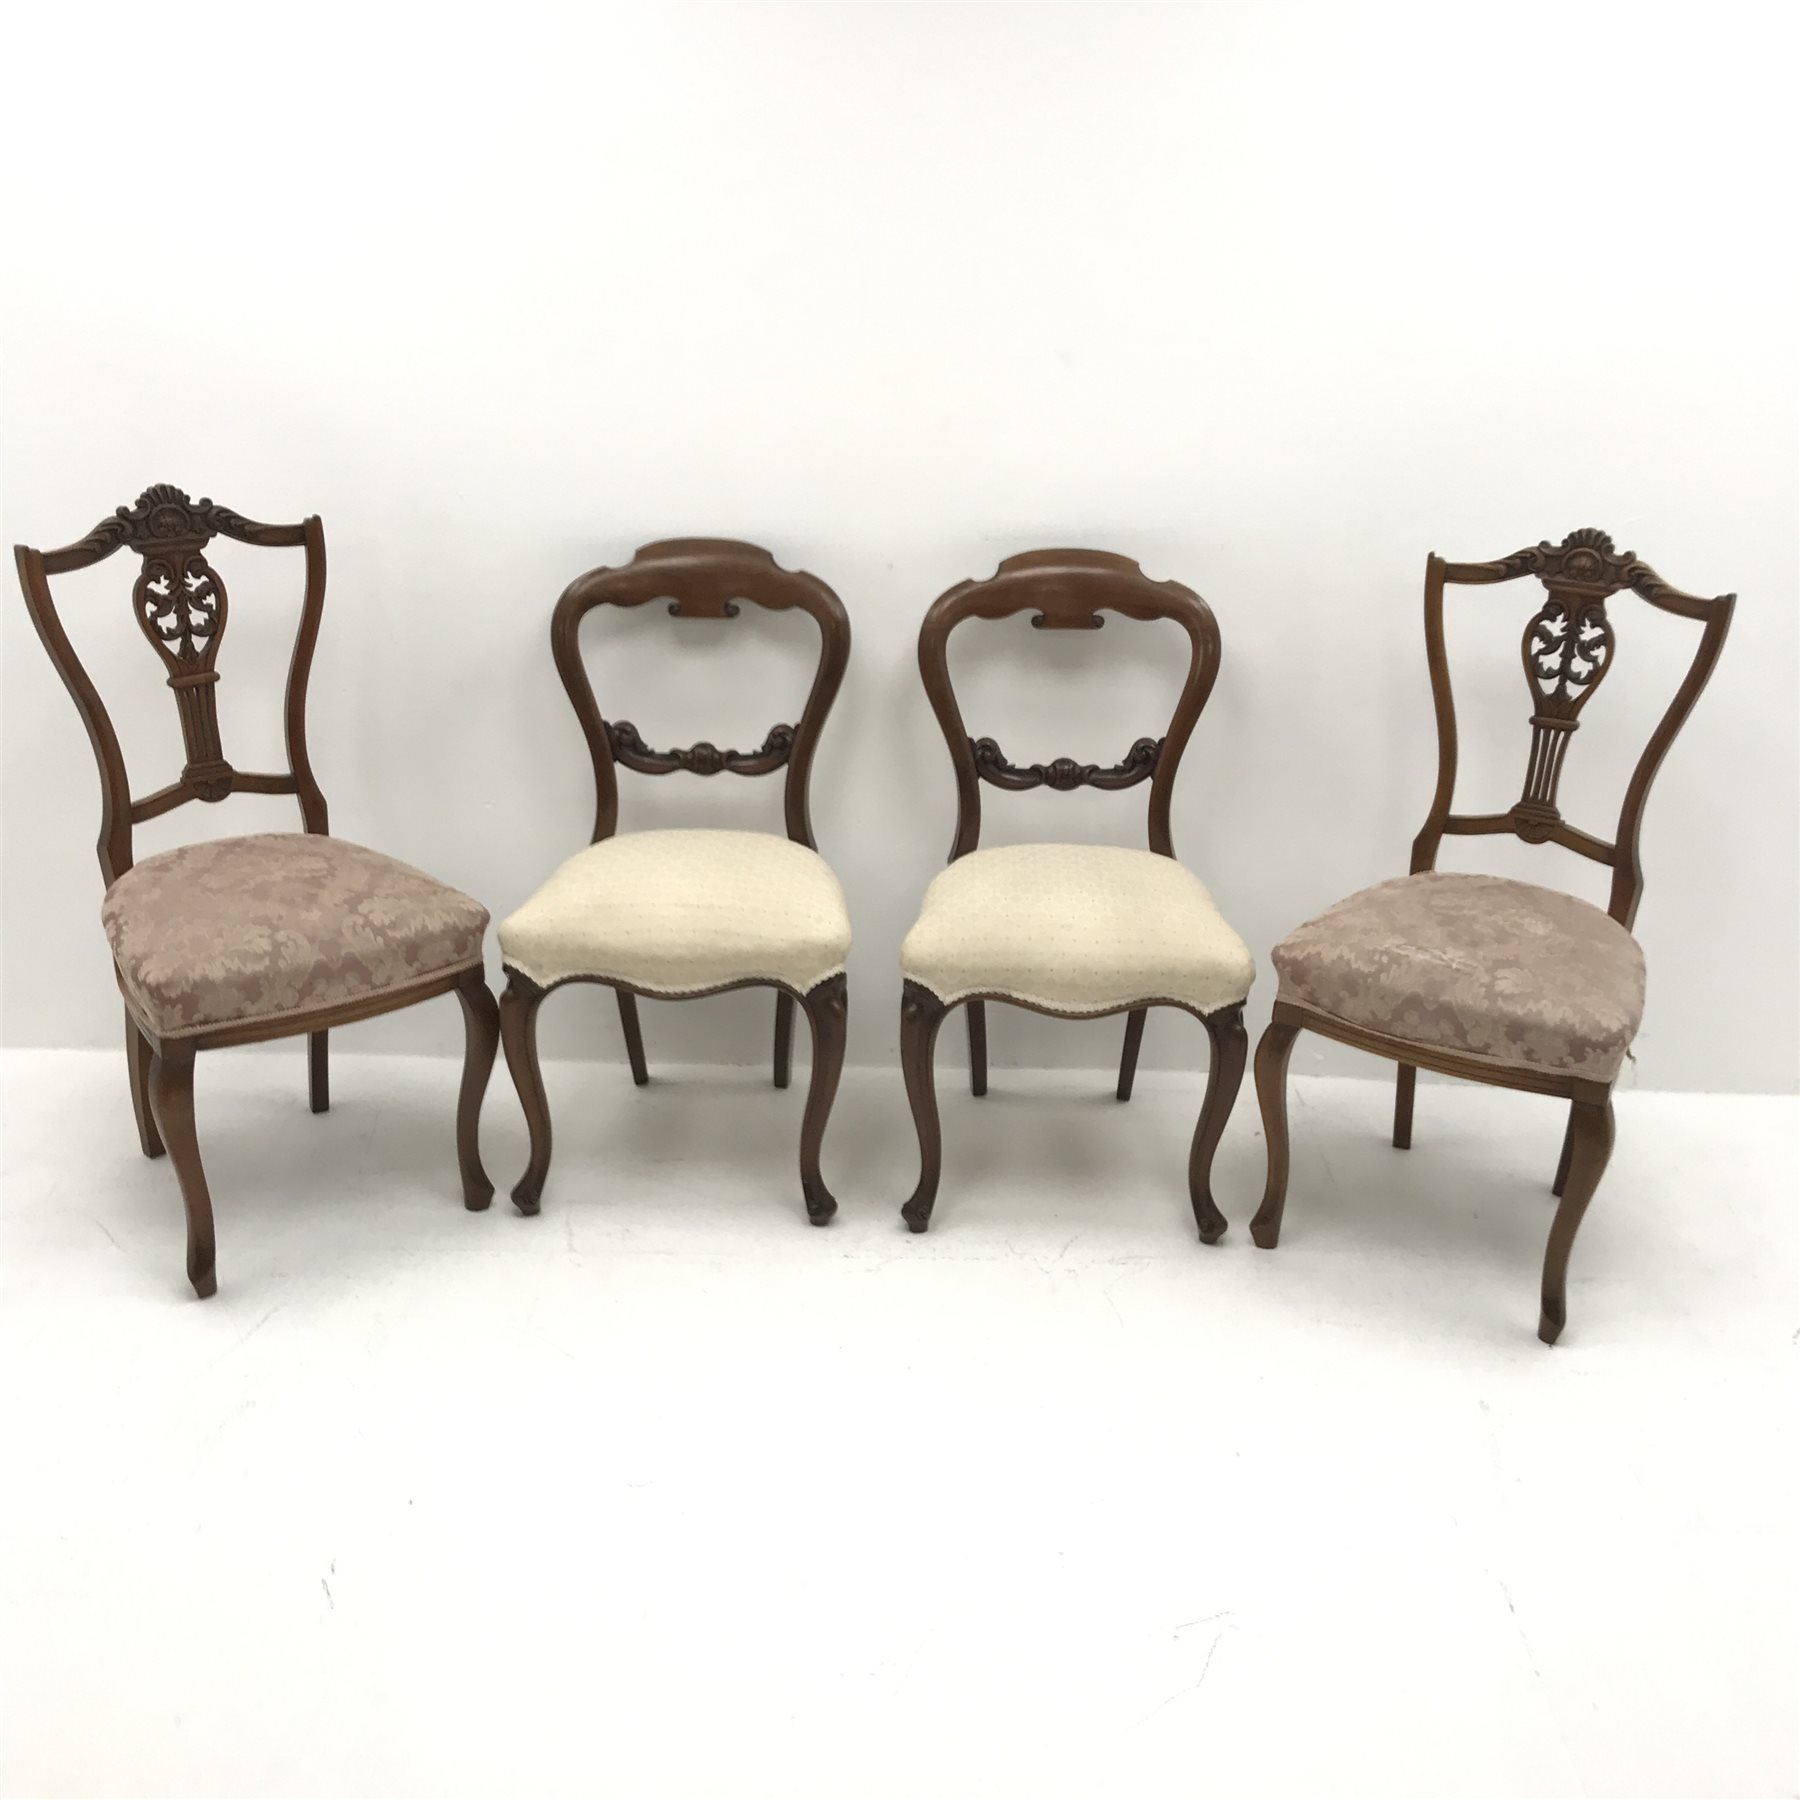 Two Victorian mahogany chairs with upholstered seats (W49cm) and two Edwardian mahogany salon chair - Image 2 of 3